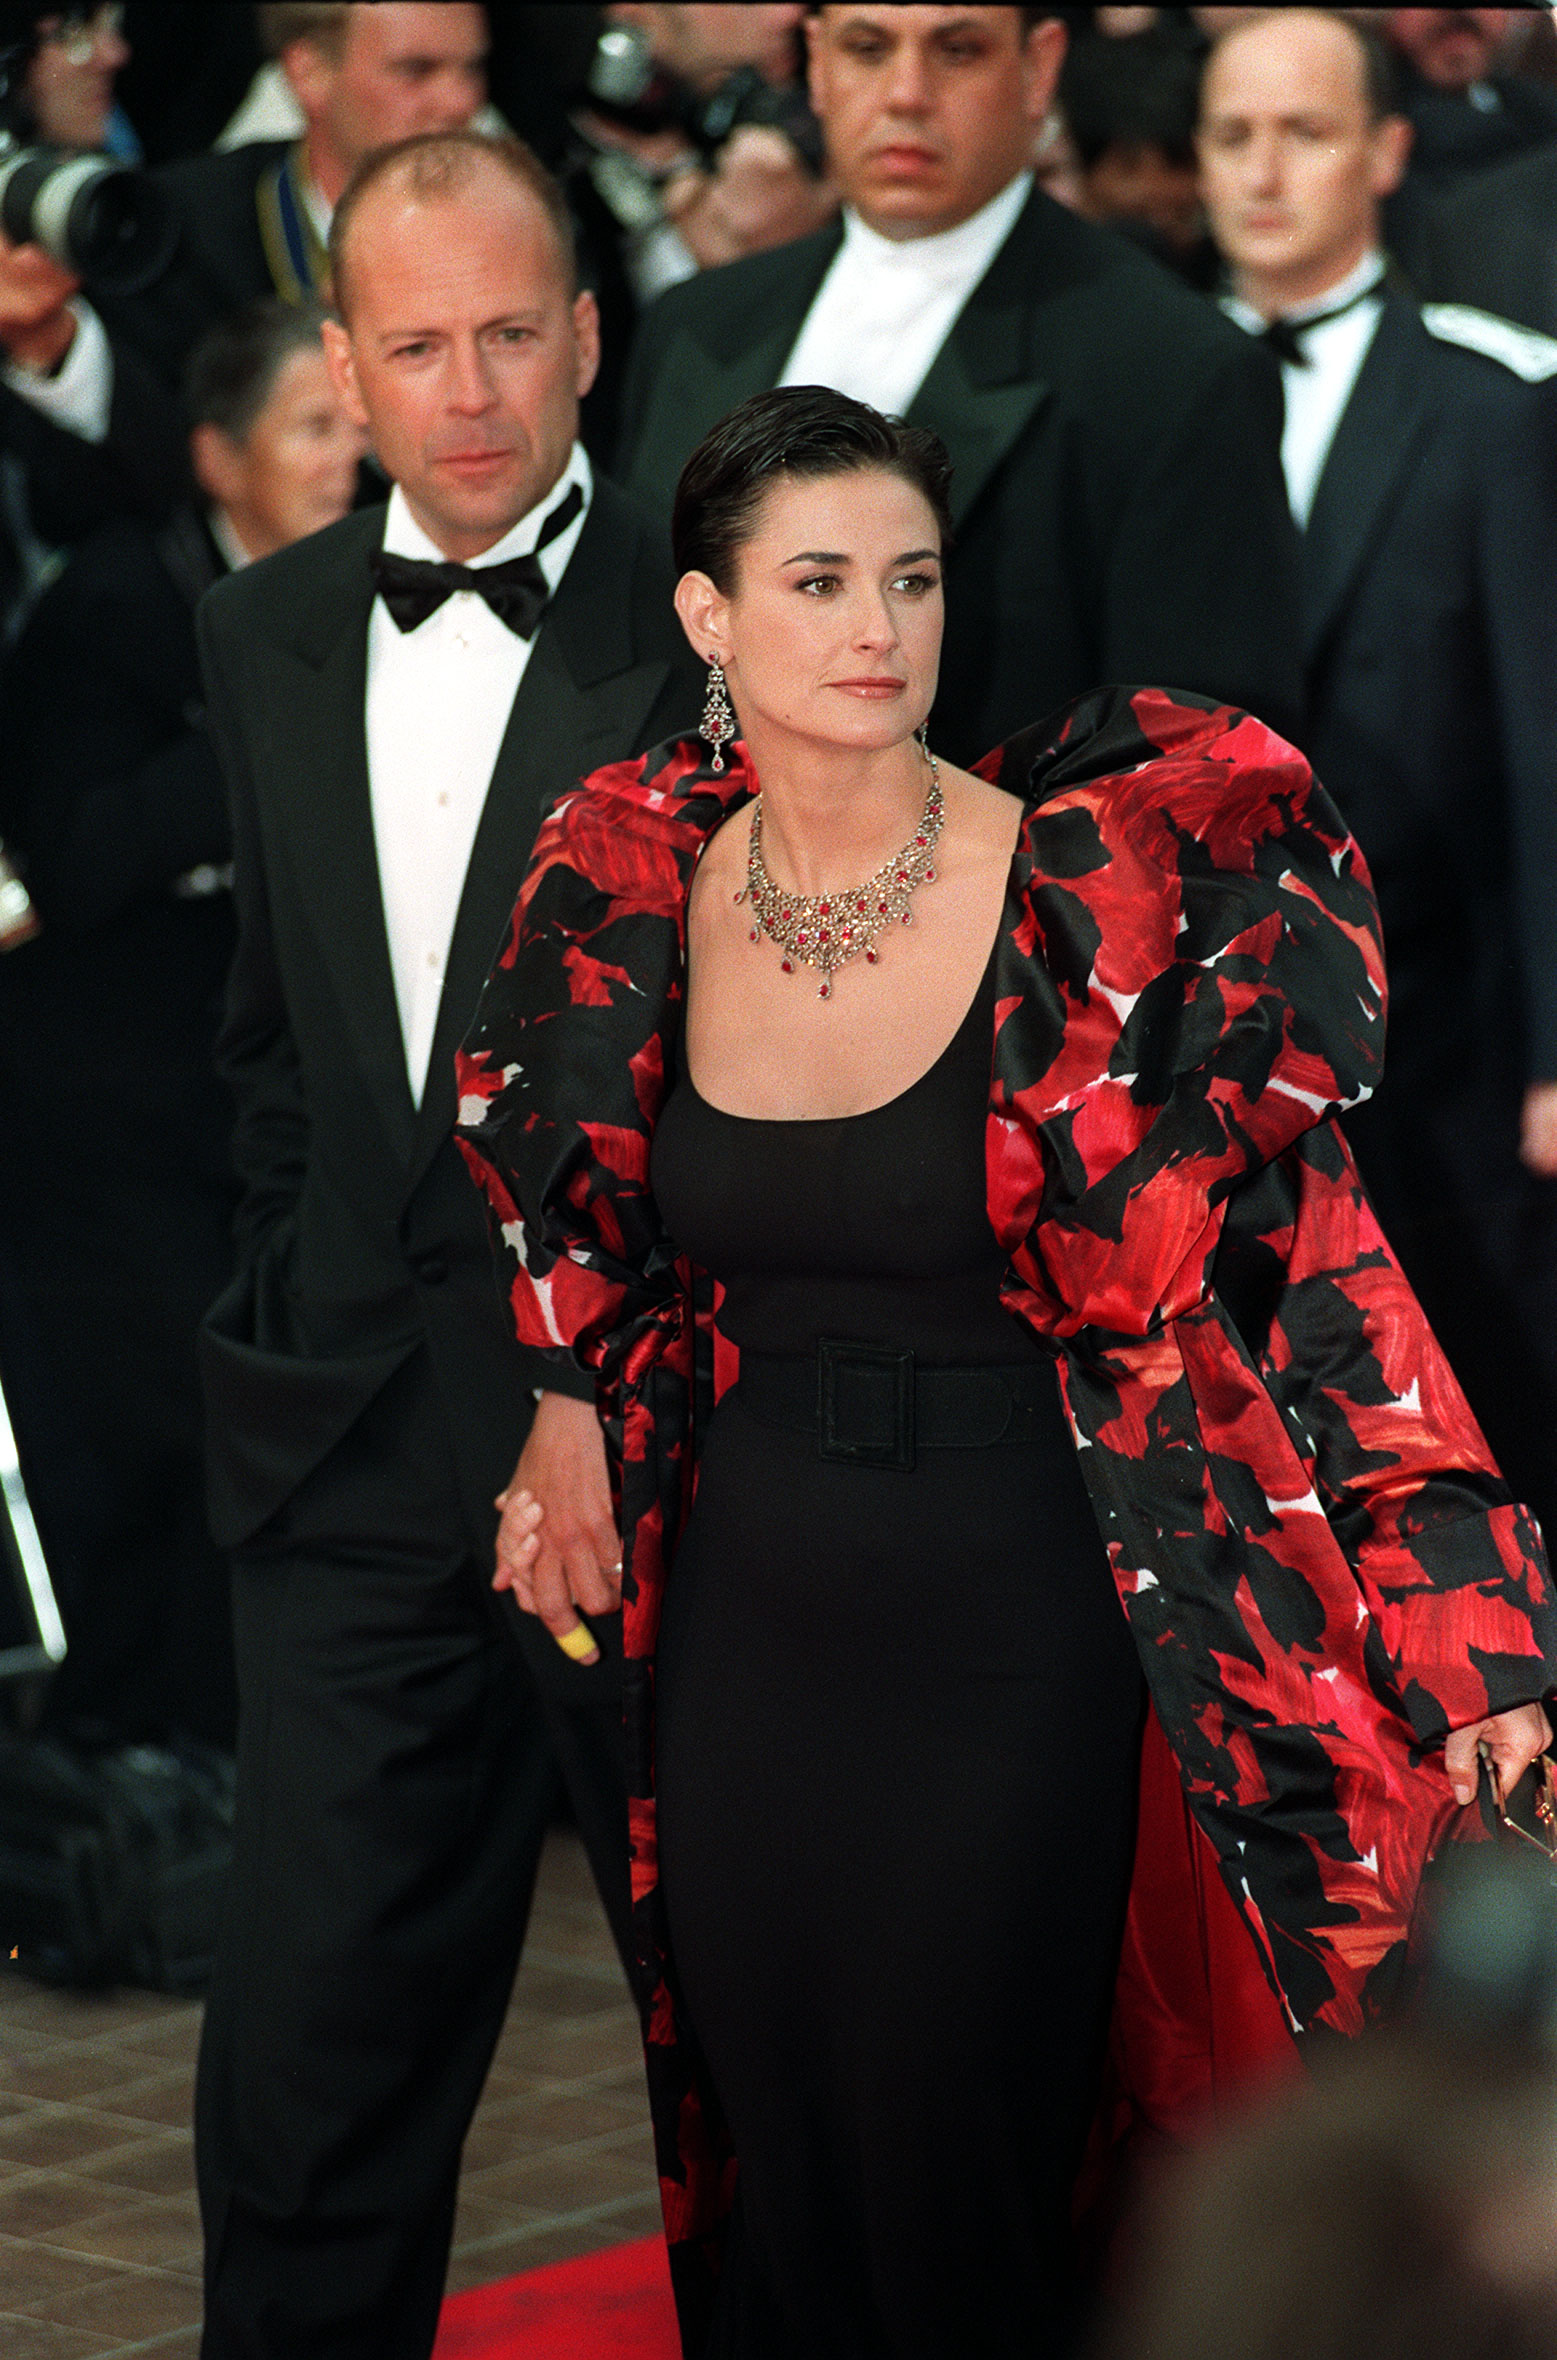 Bruce Willis and Demi Moore at the 50th Cannes Film Festival in France in 1997. | Source: Getty Images